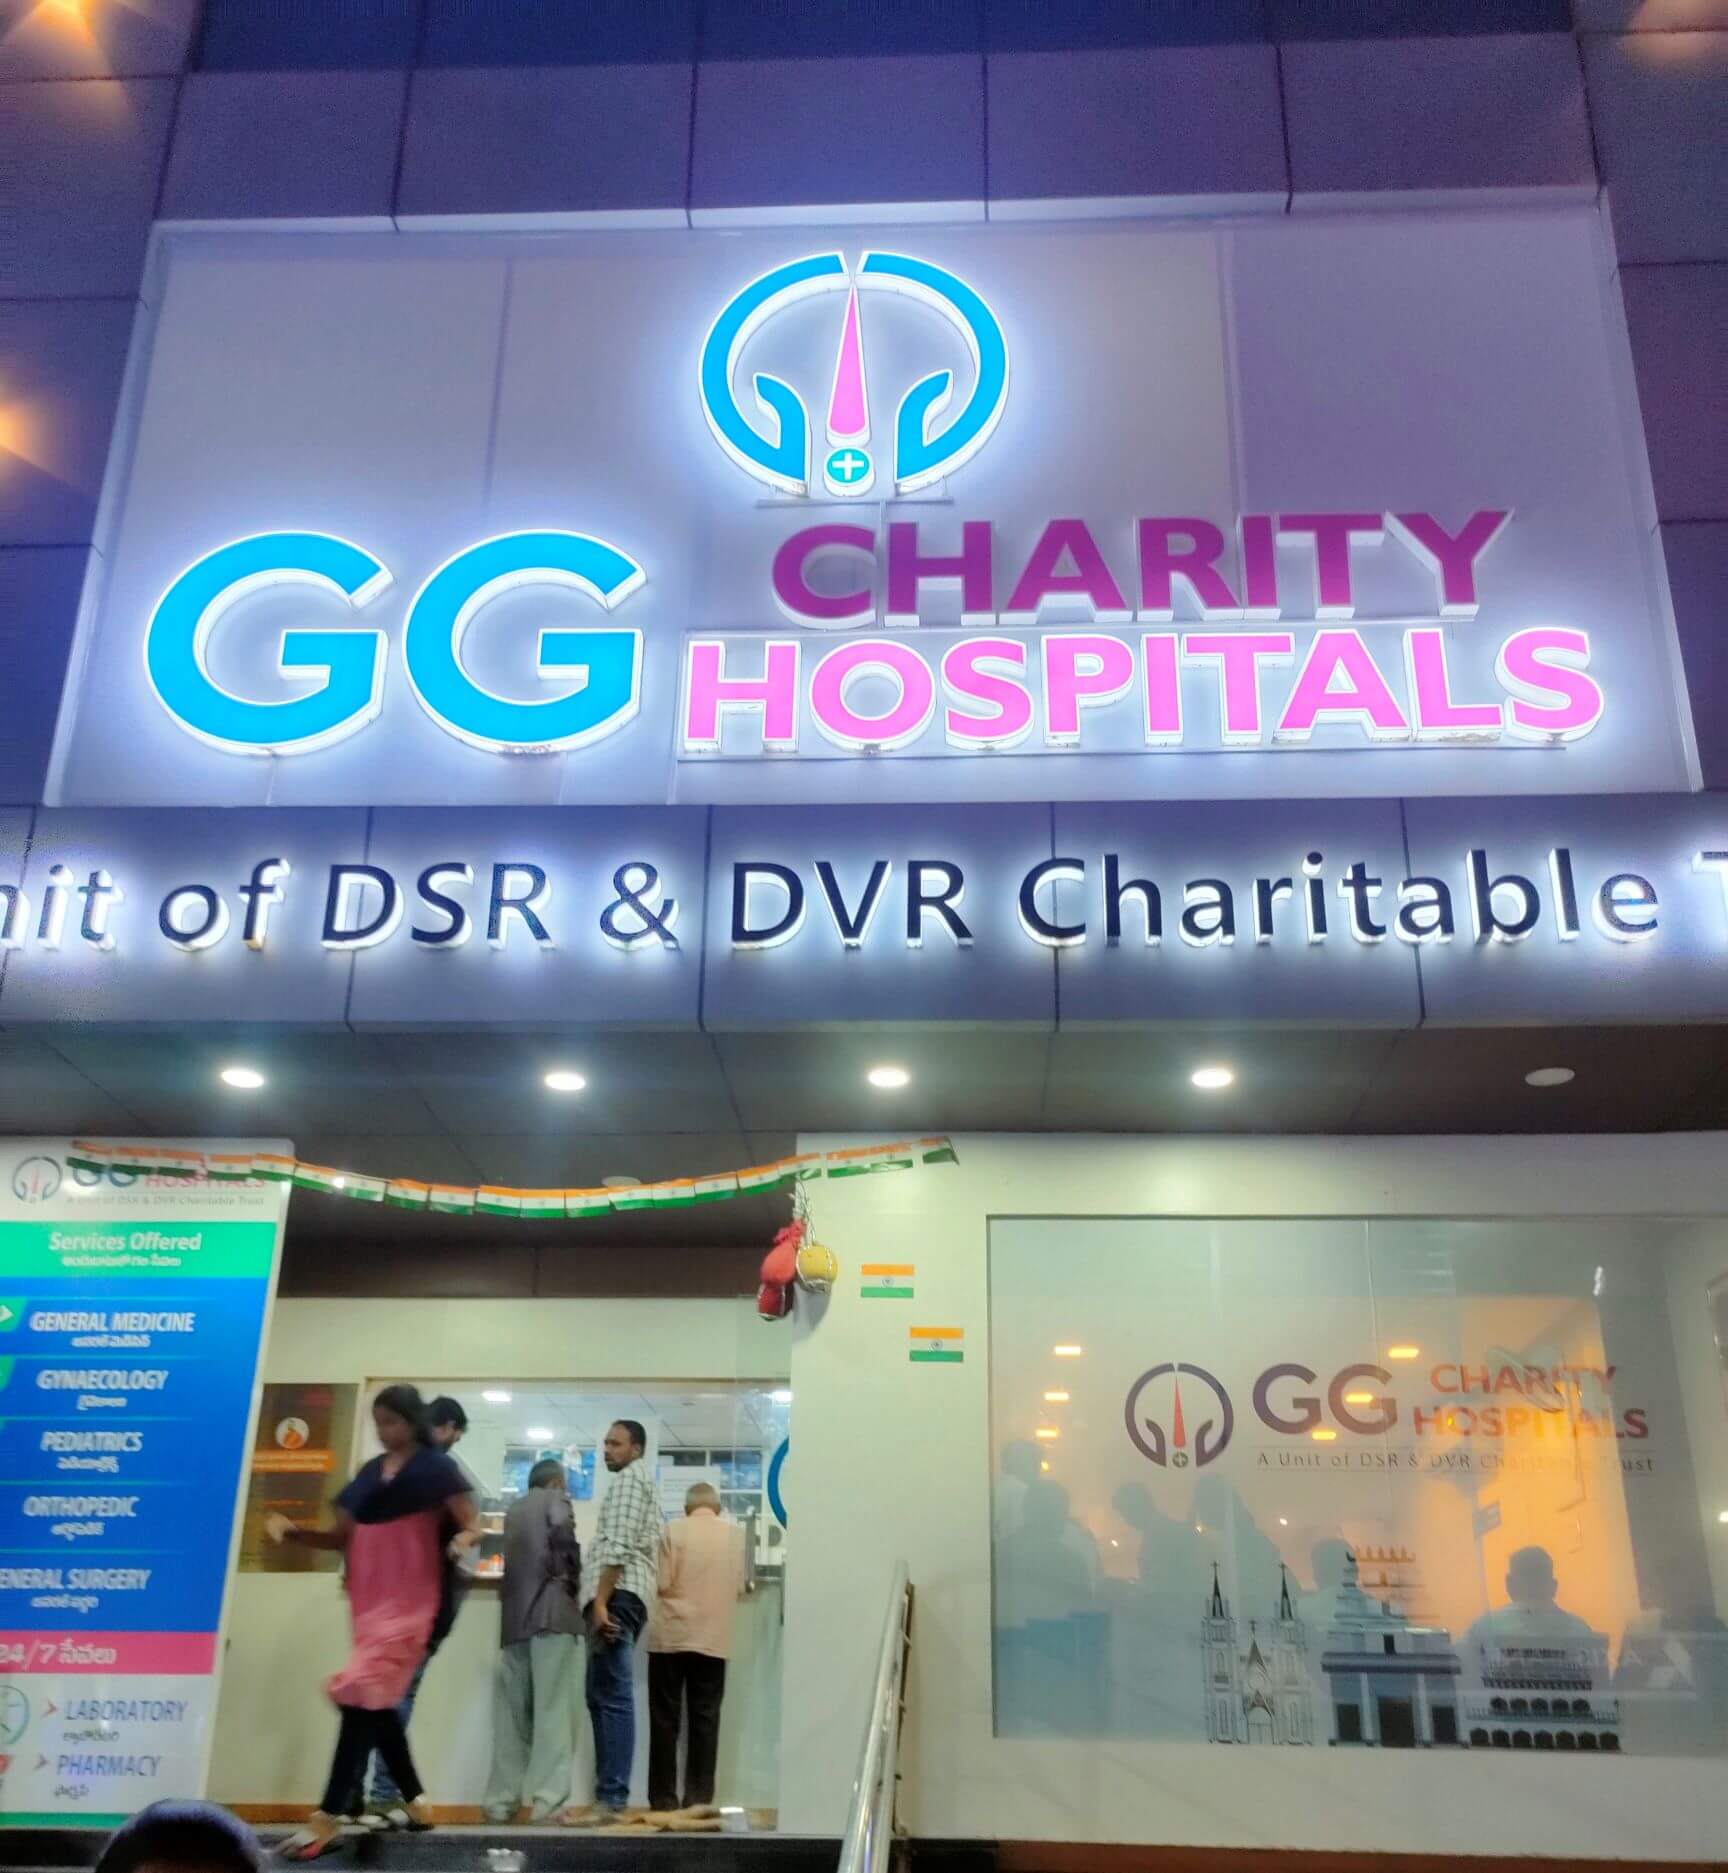 GG Charity Hospitals1